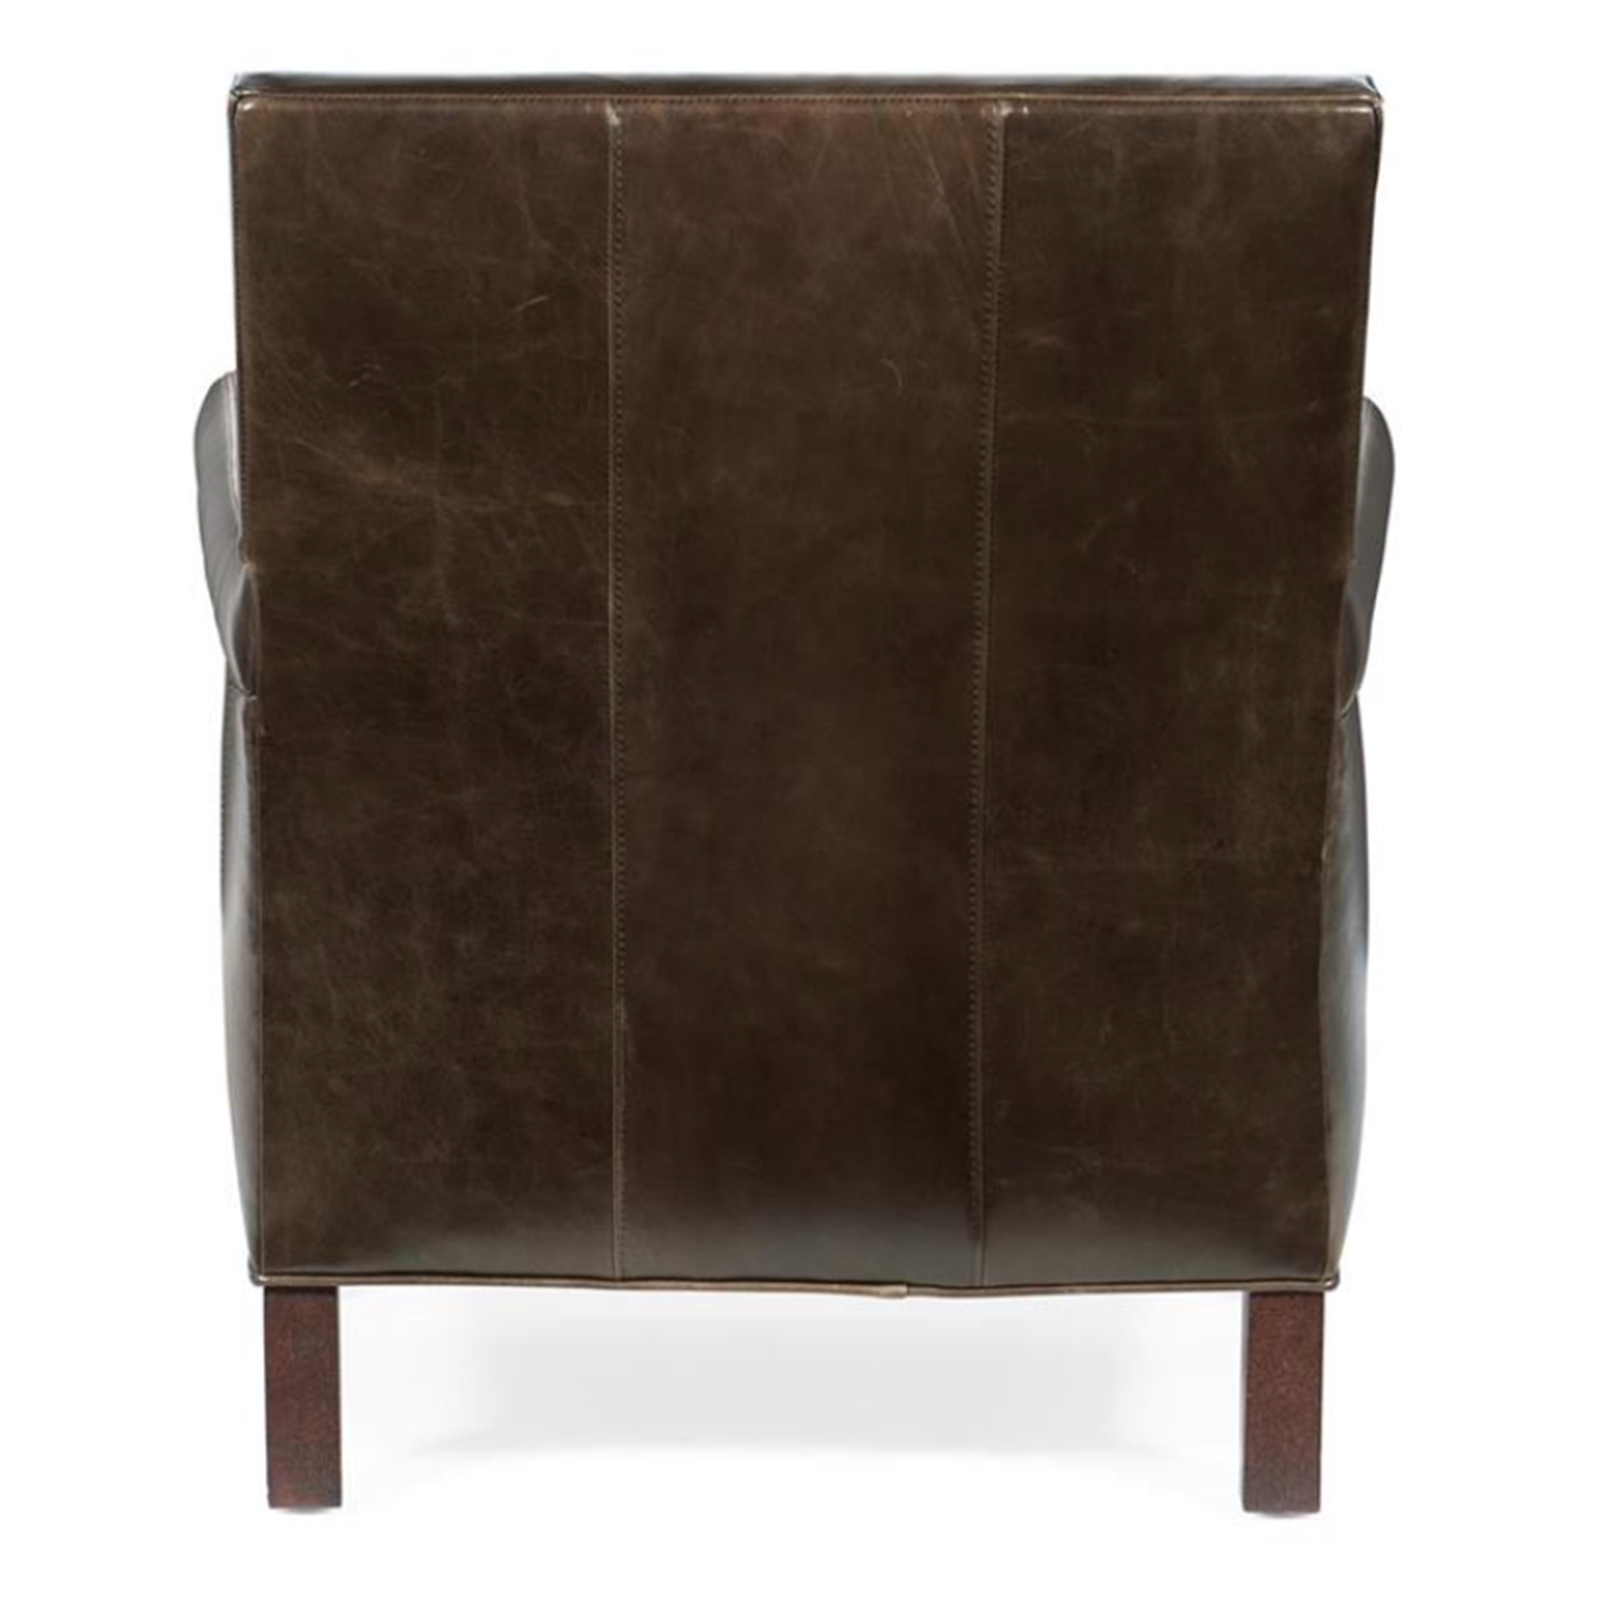 Gentry Leather Club Chair